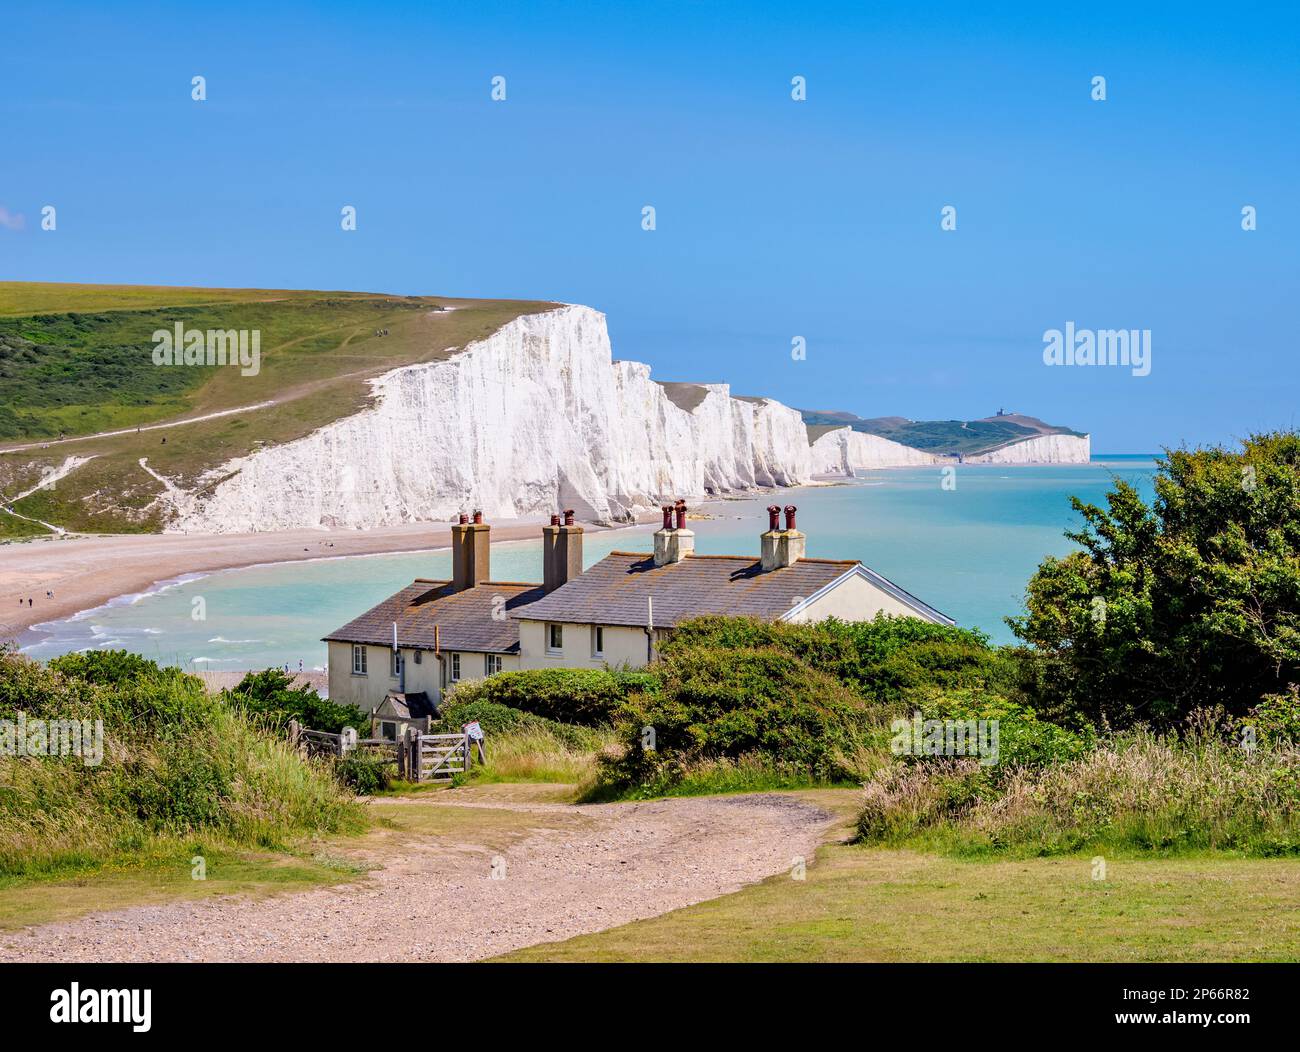 Coastguard Cottages and Seven Sisters Cliffs, Cuckmere Haven, South Downs National Park, East Sussex, England, United Kingdom, Europe Stock Photo